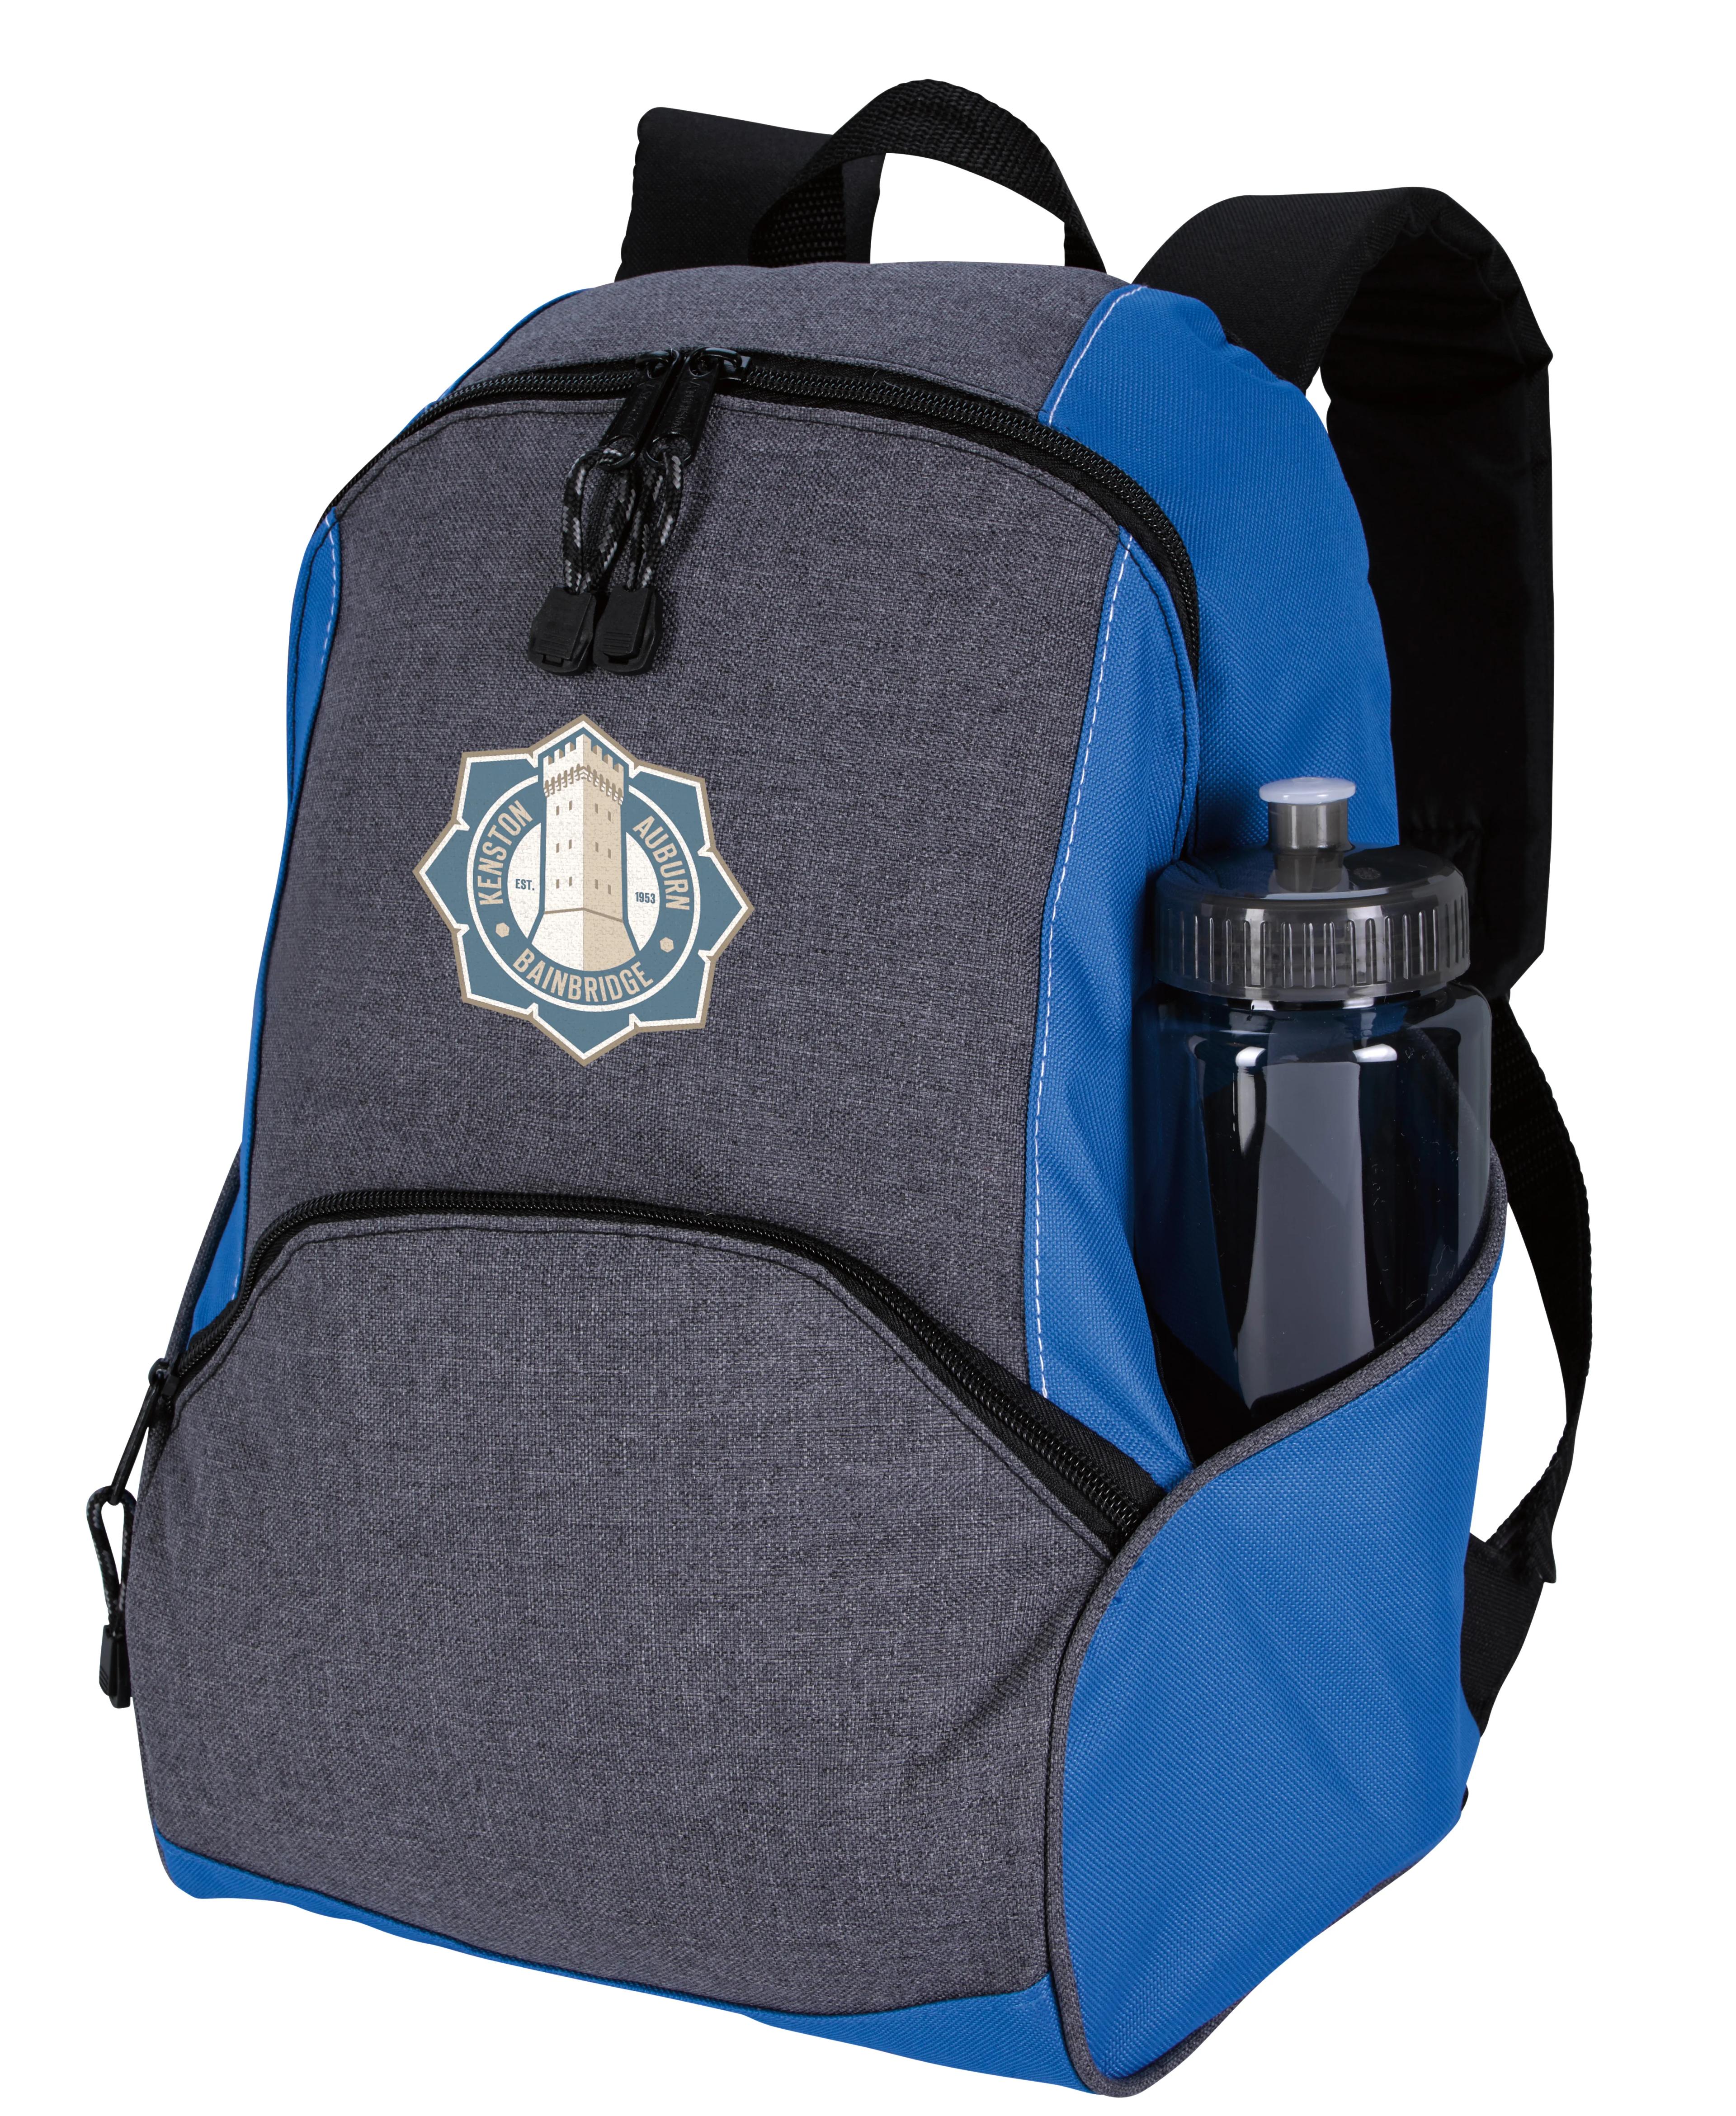 Two-Tone On the Move Backpack 21 of 25